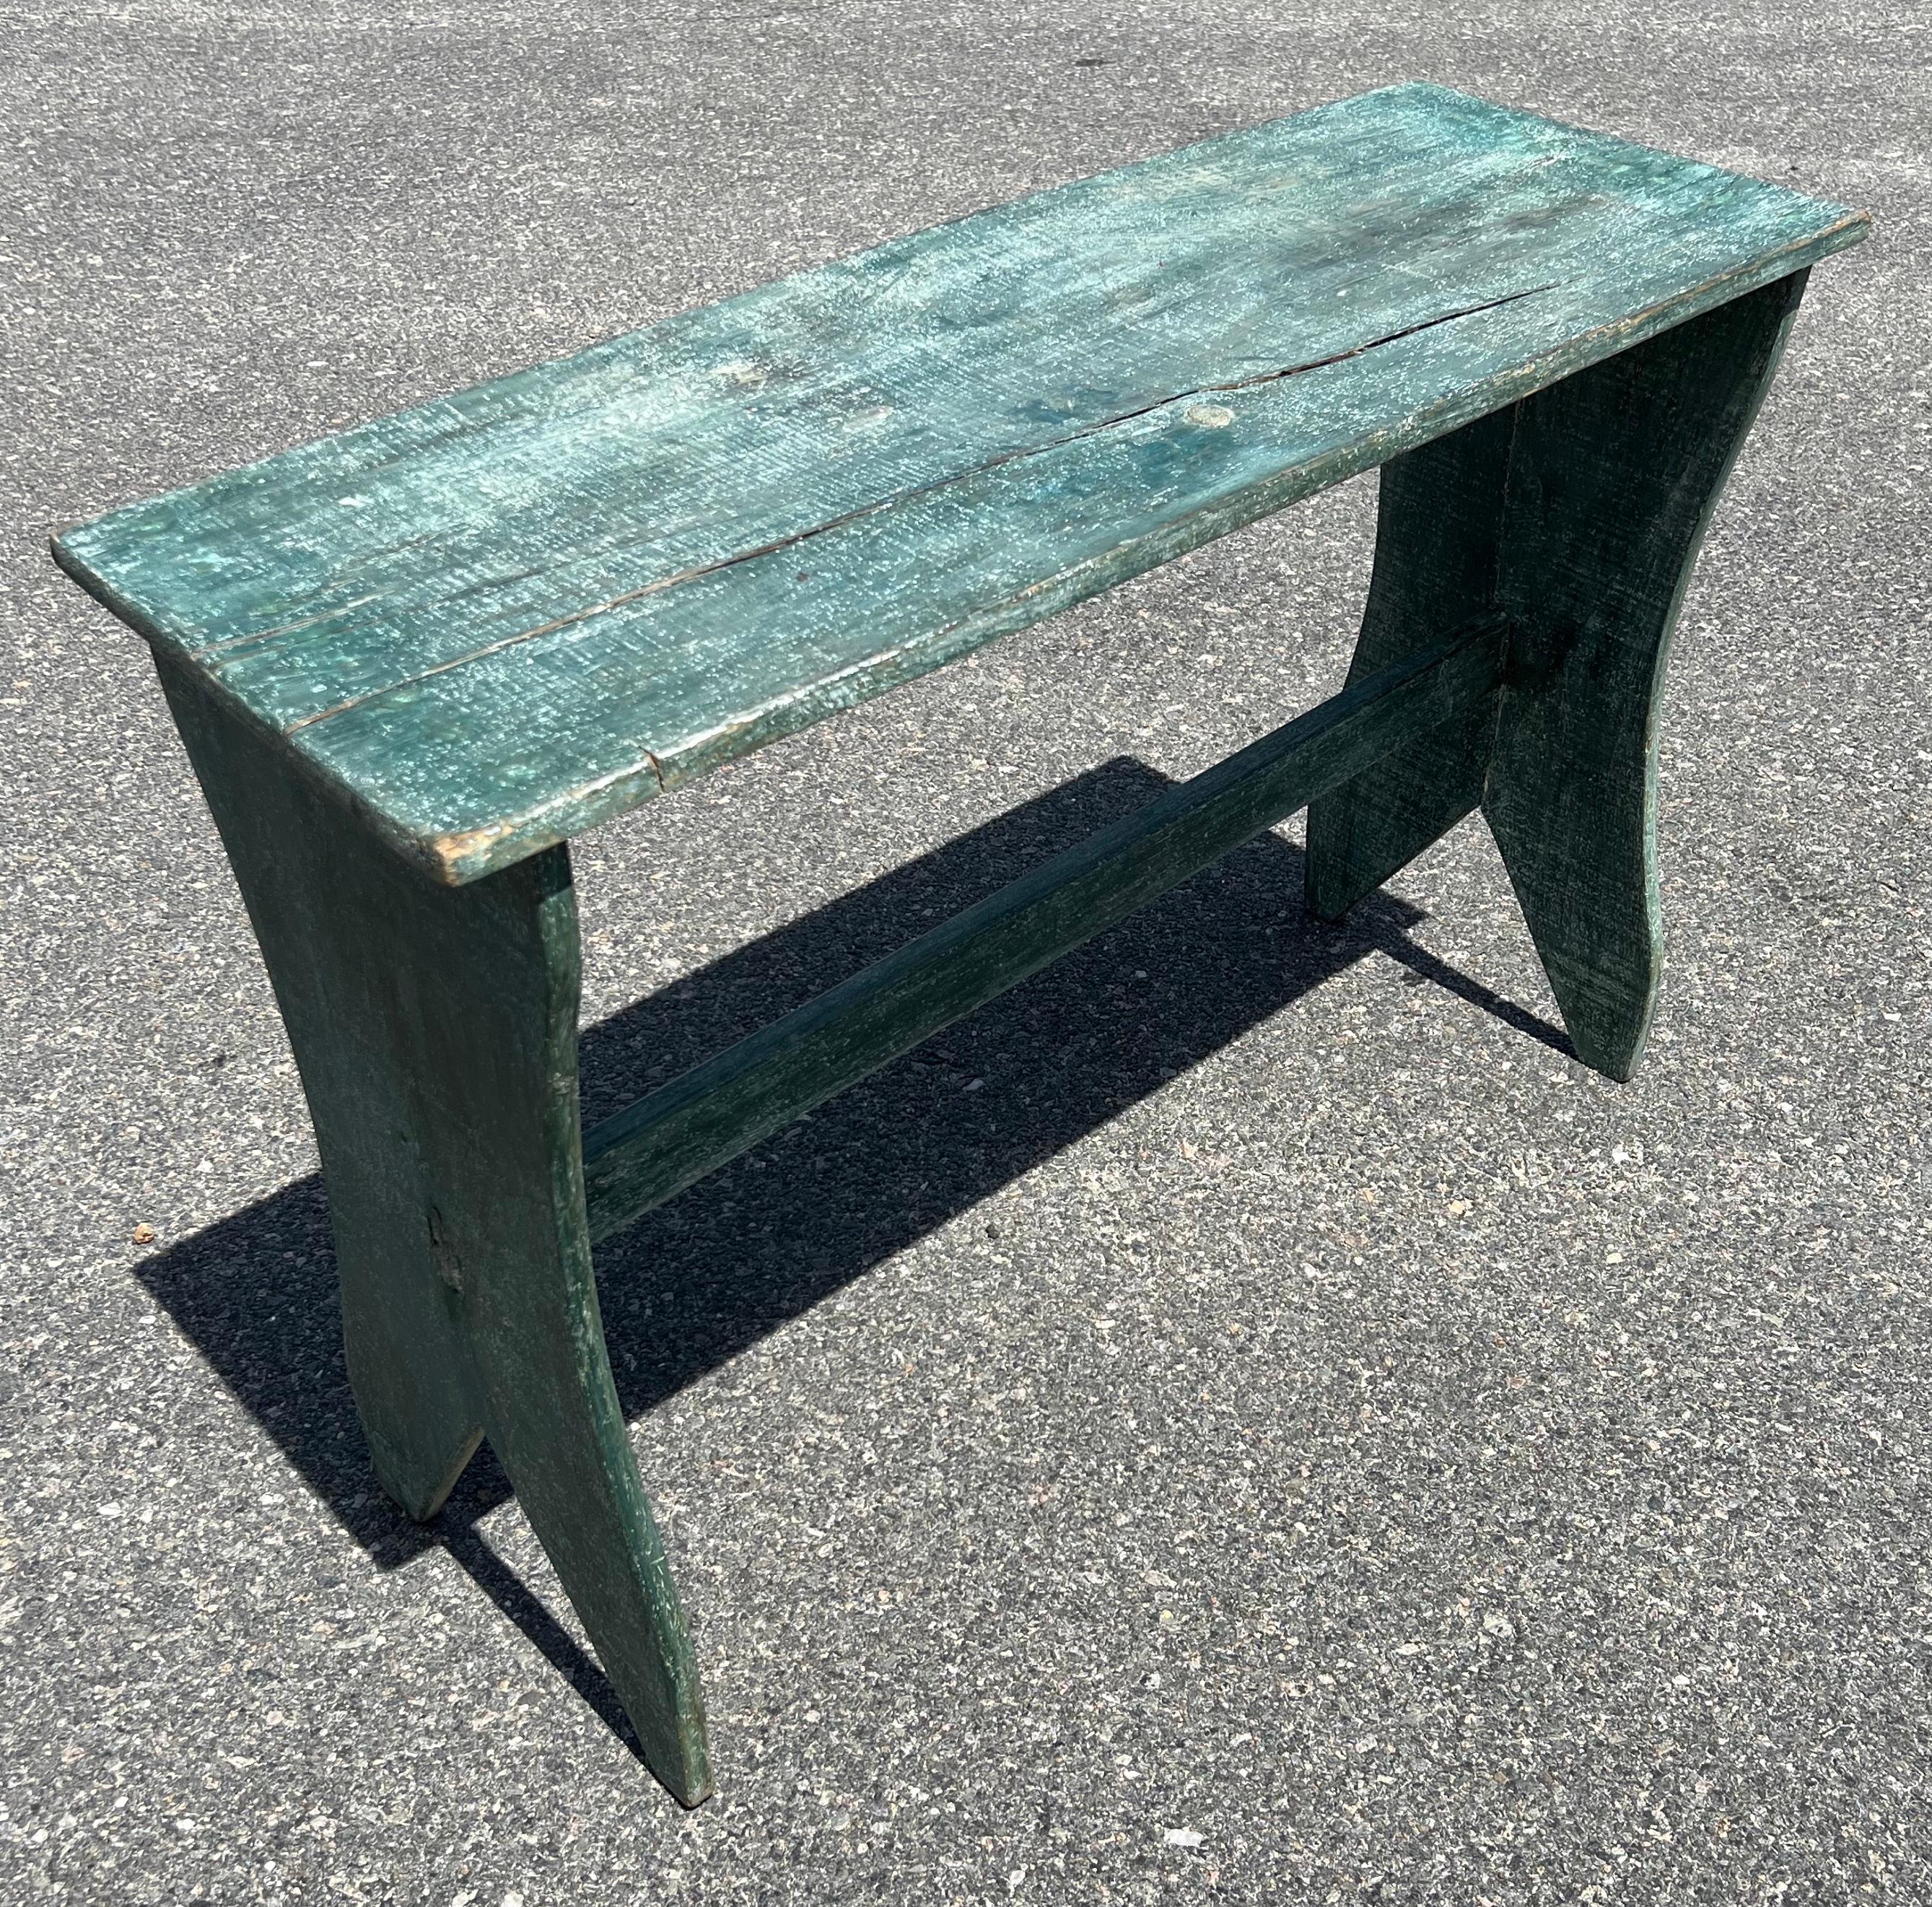 19th century pine side table(or tall bench) in blue-green paint with stretcher and boot jack base. Old crack in top.